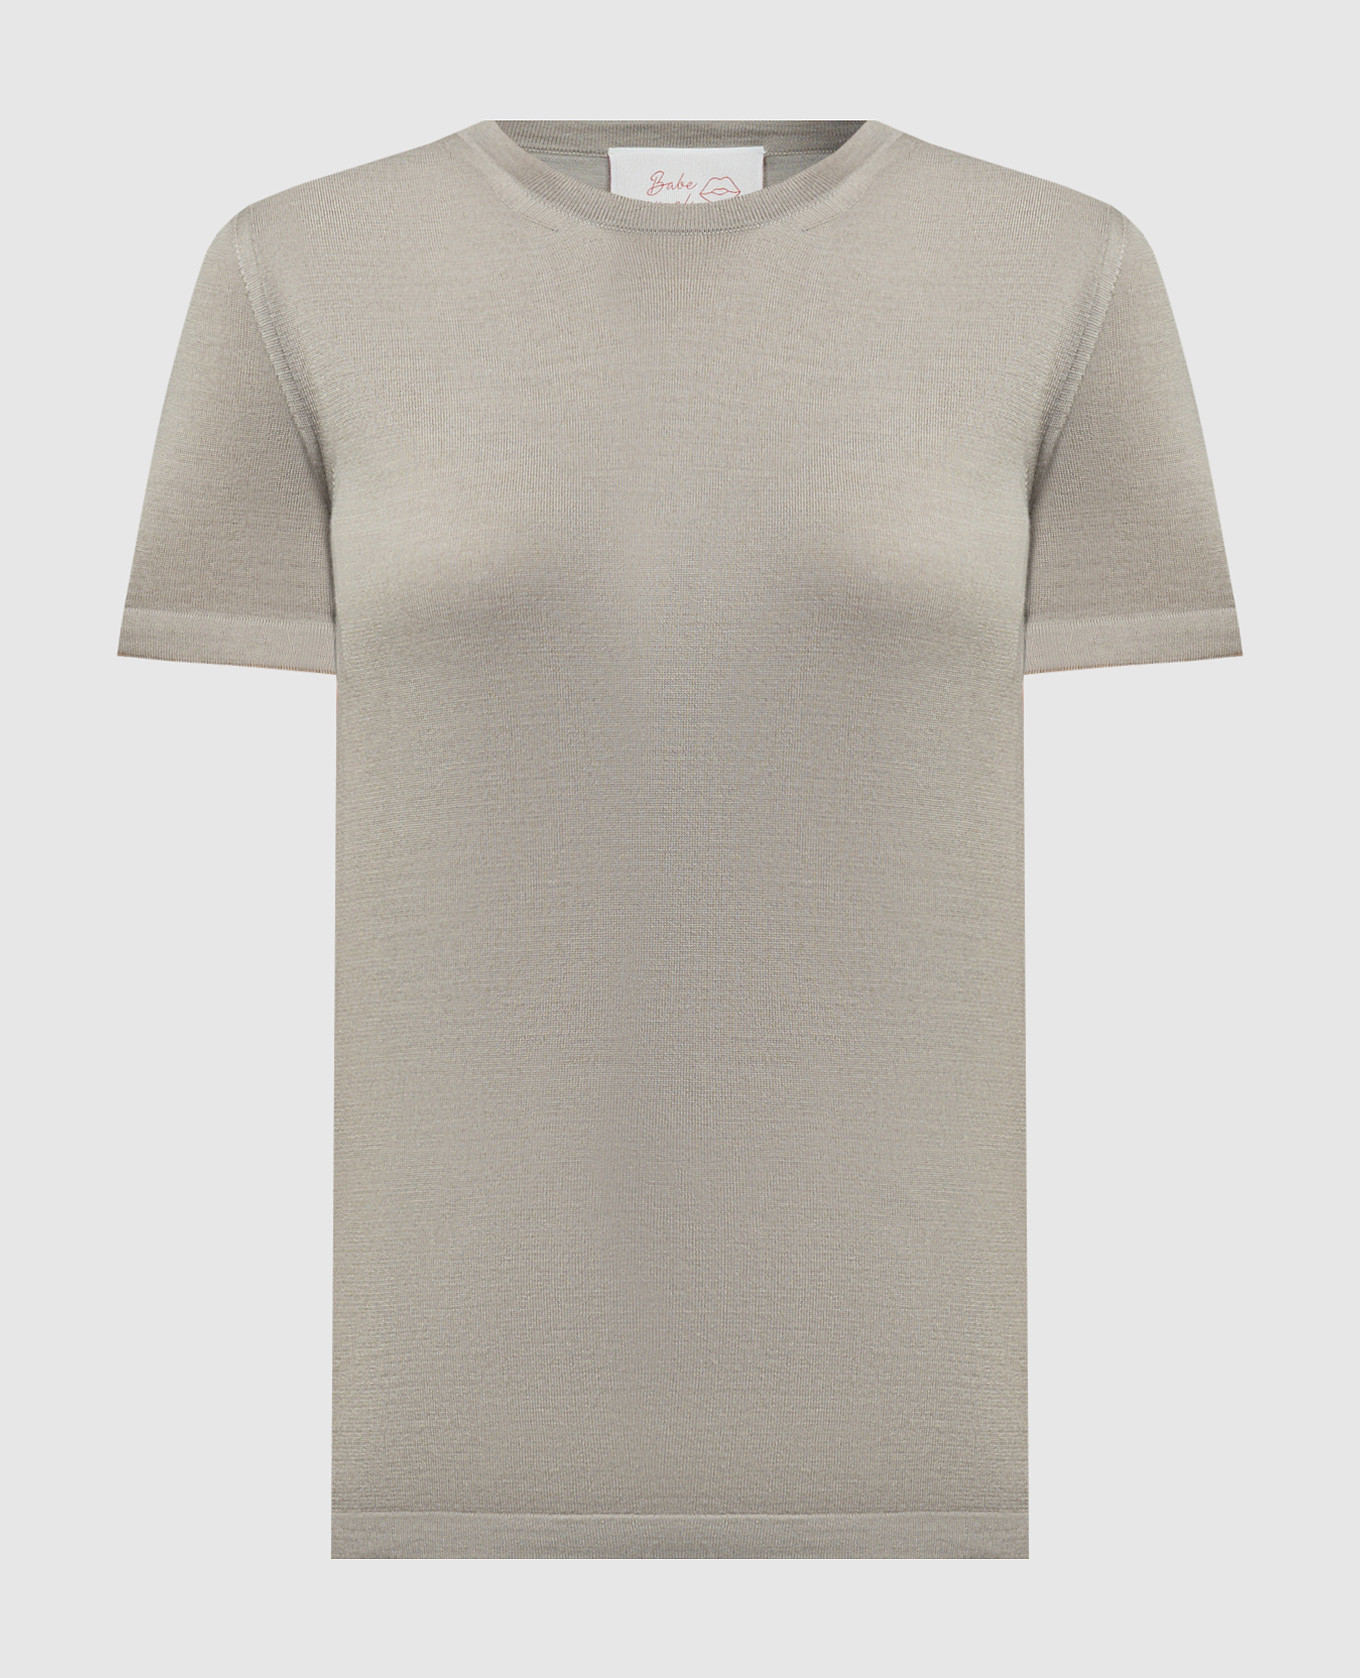 Beige t-shirt made of wool, silk and cashmere